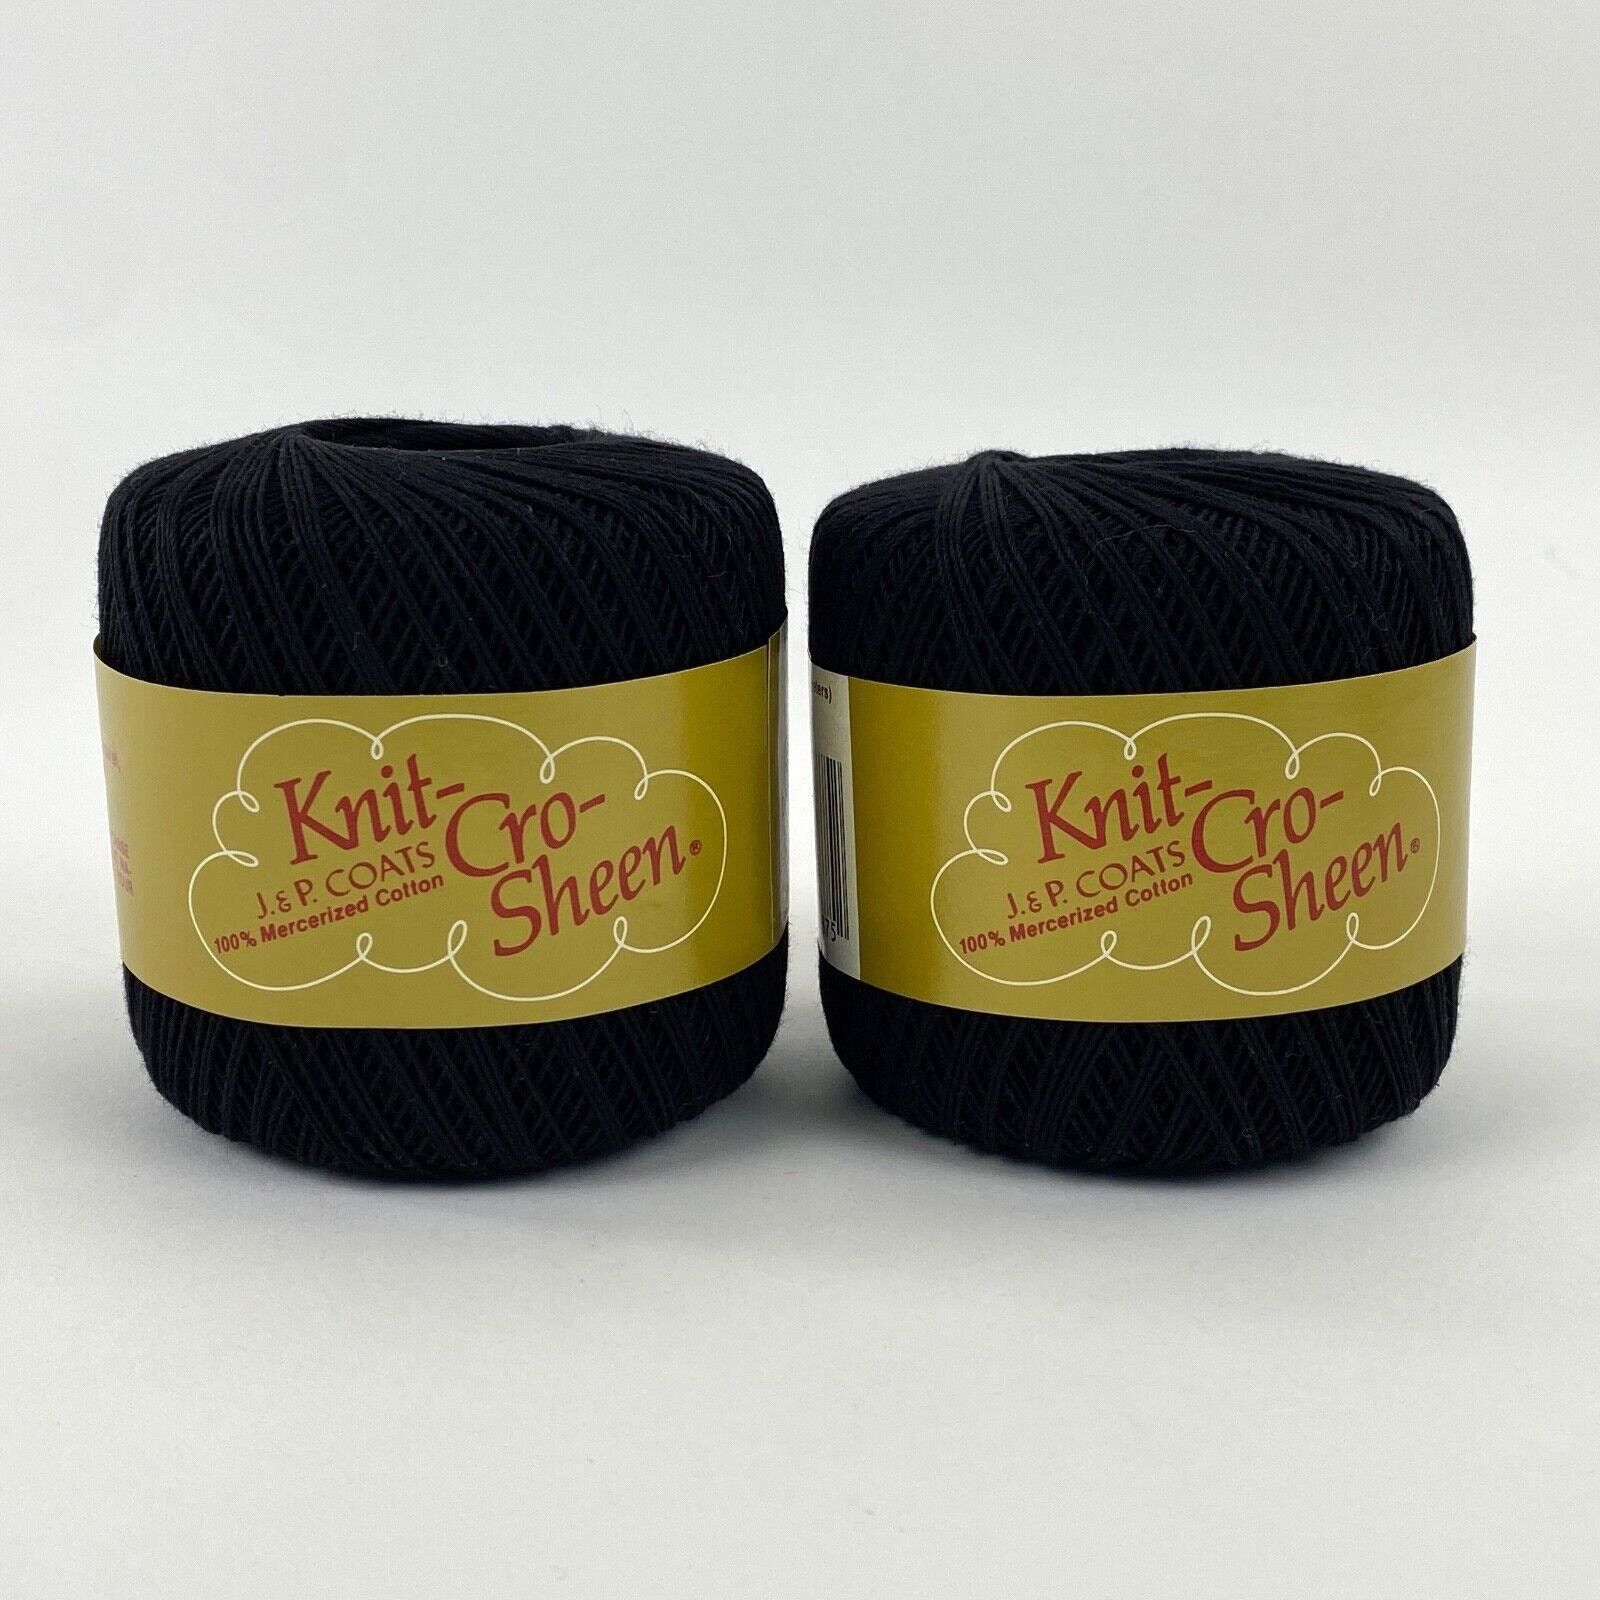 Star Coats and Clark Cotton Thread For Sewing, Machine Quilting